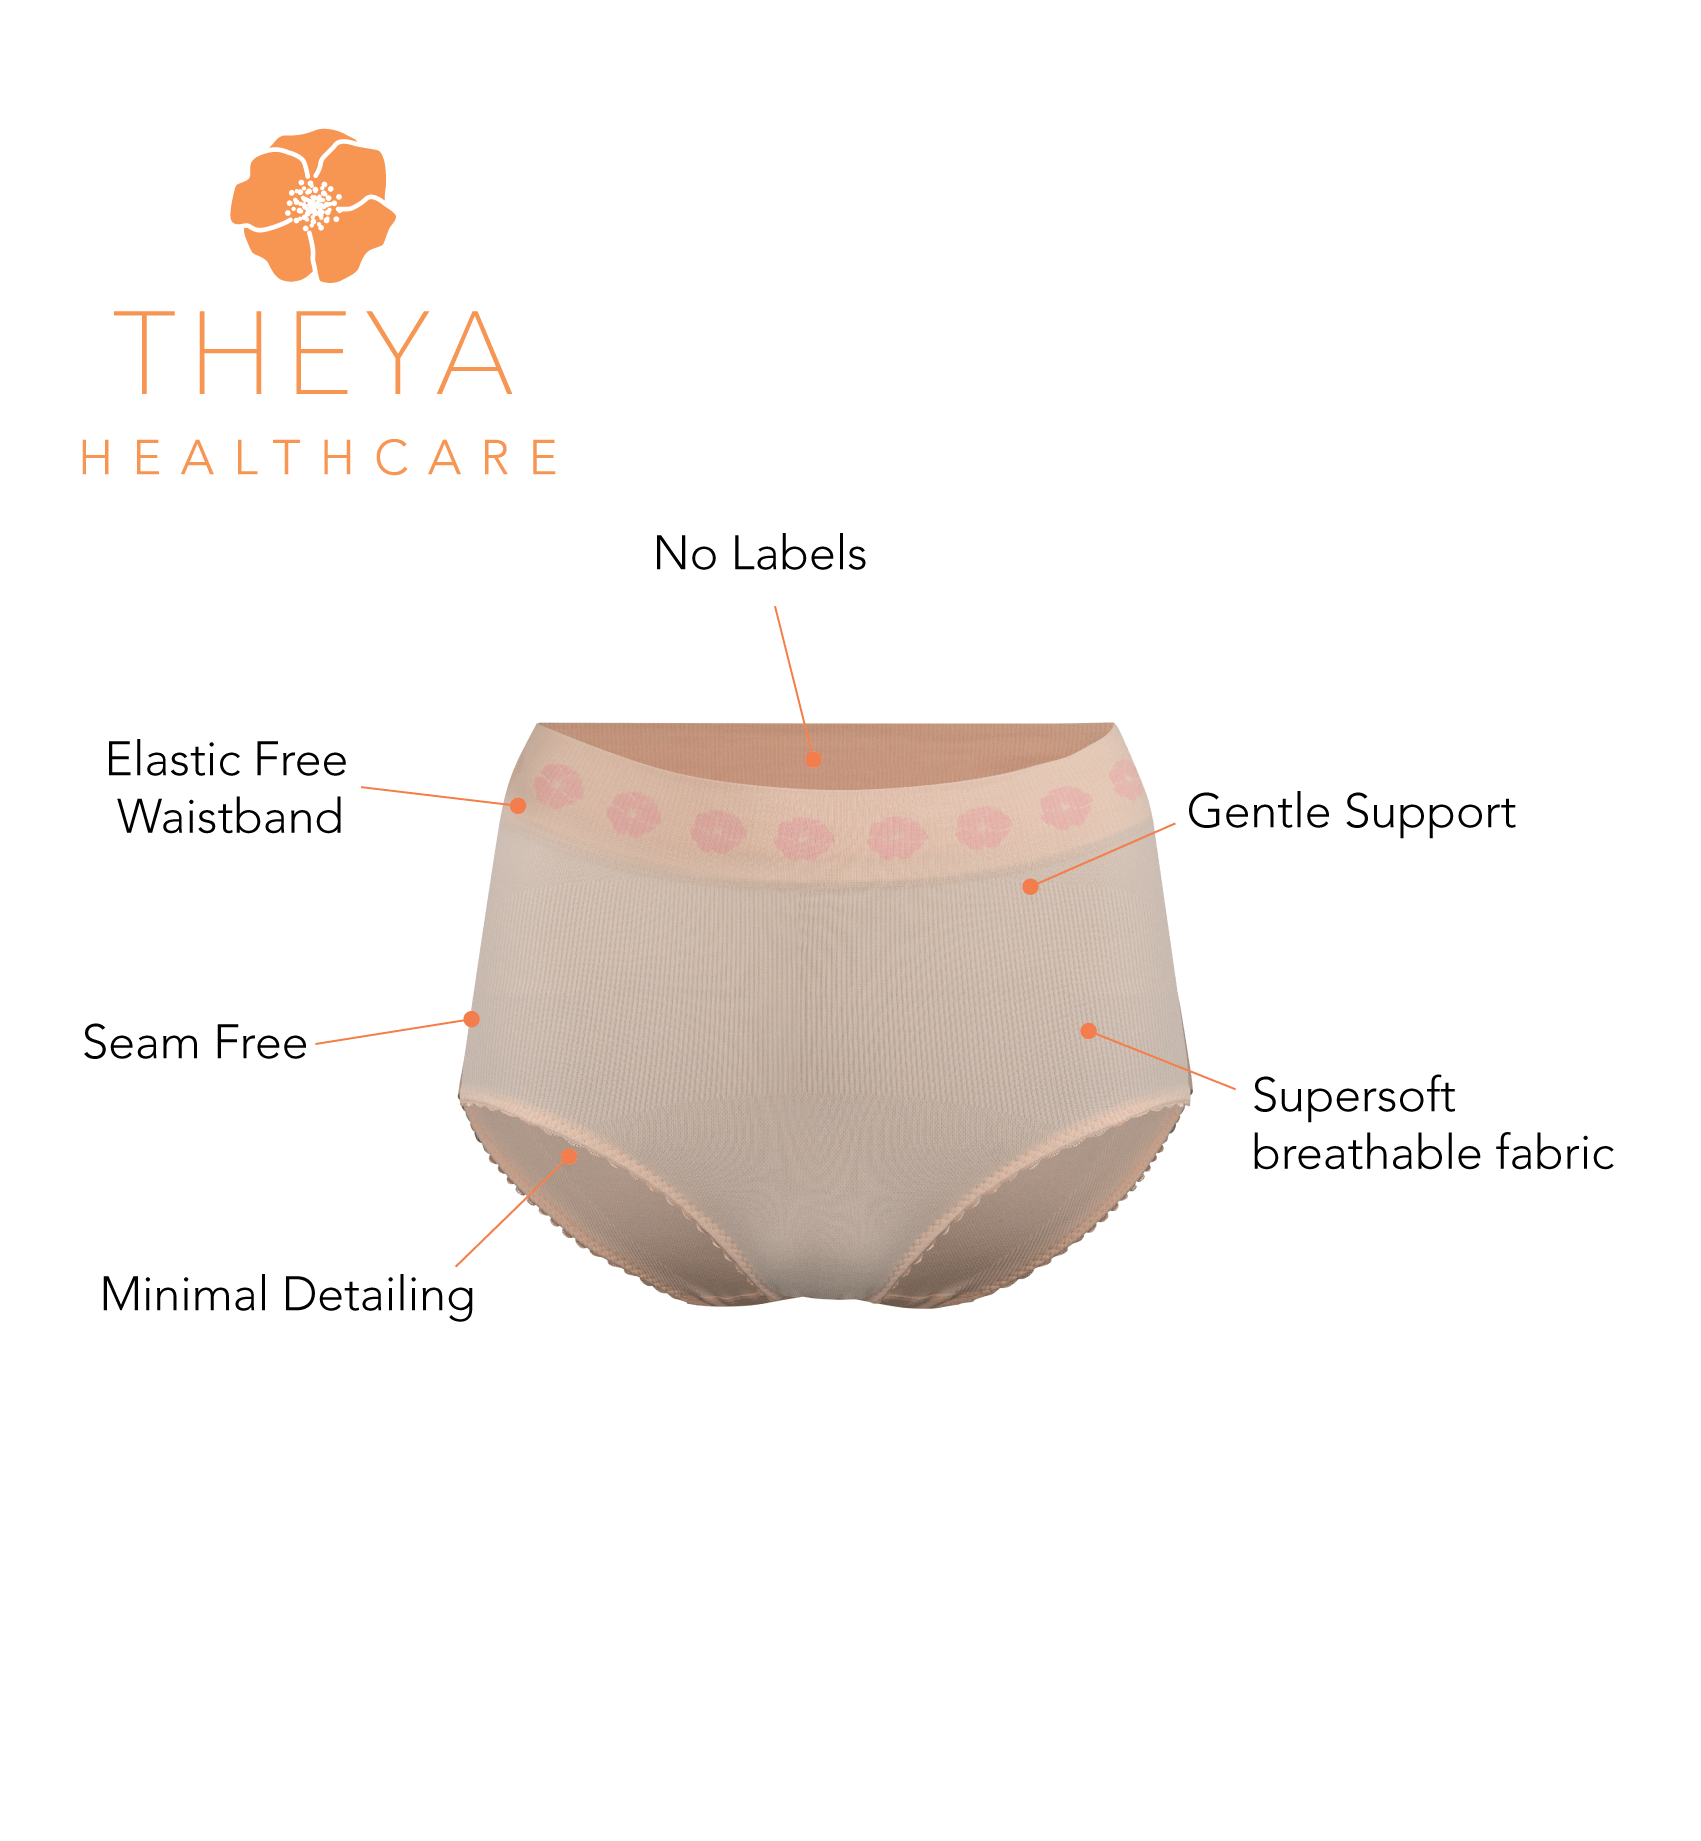 https://www.themobilityshop.ie/images/detailed/102/THEYAHealthcare_petal_features.png